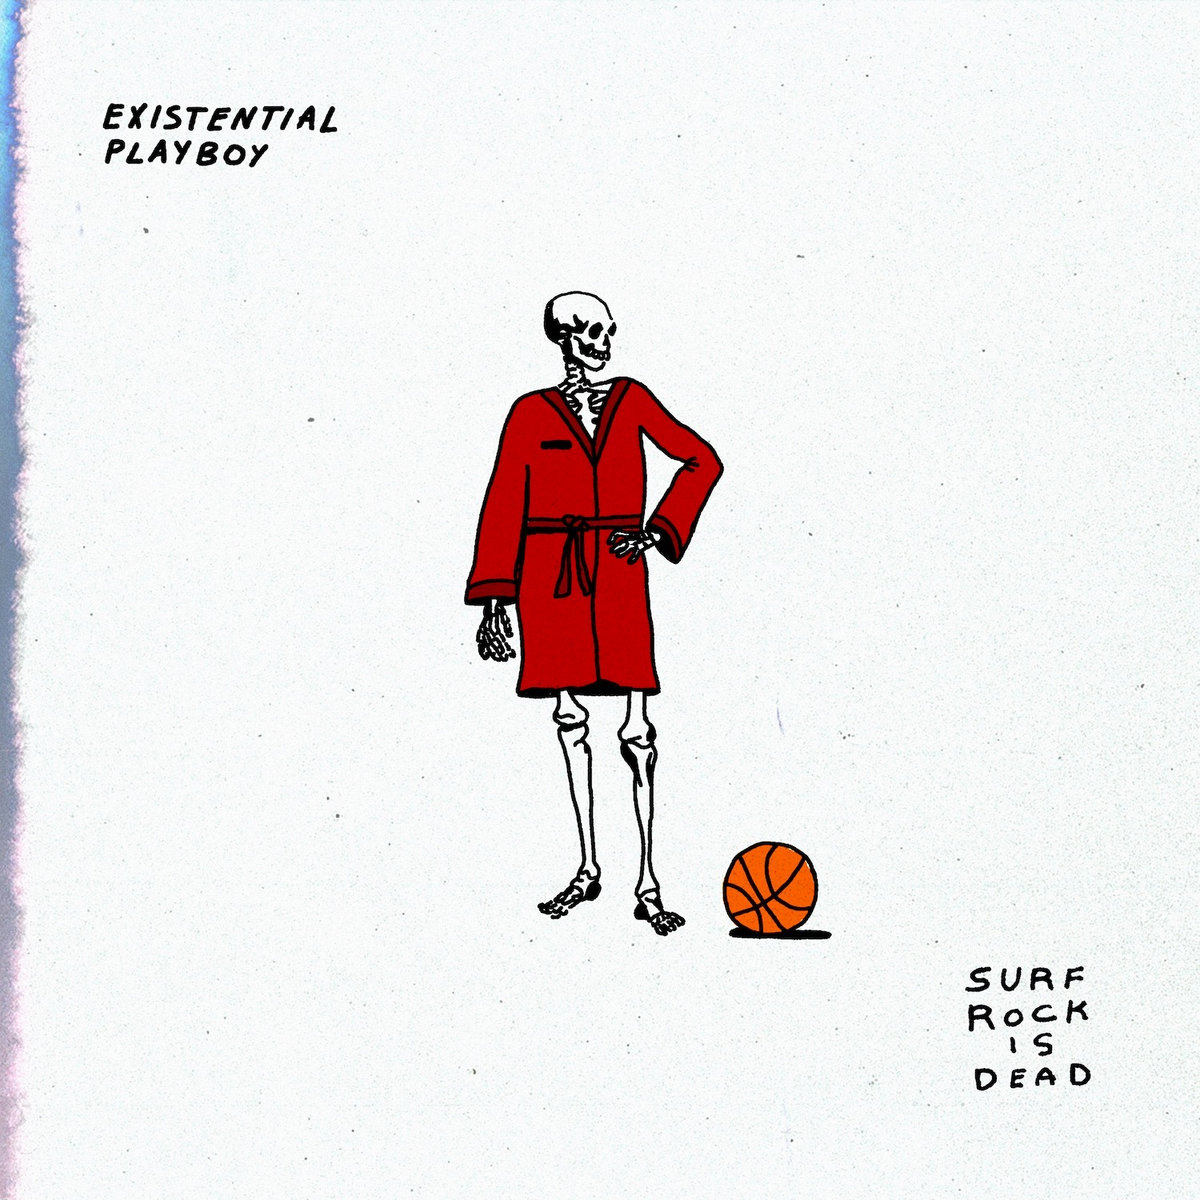 Surf Rock is Dead Existential Playboy cover artwork